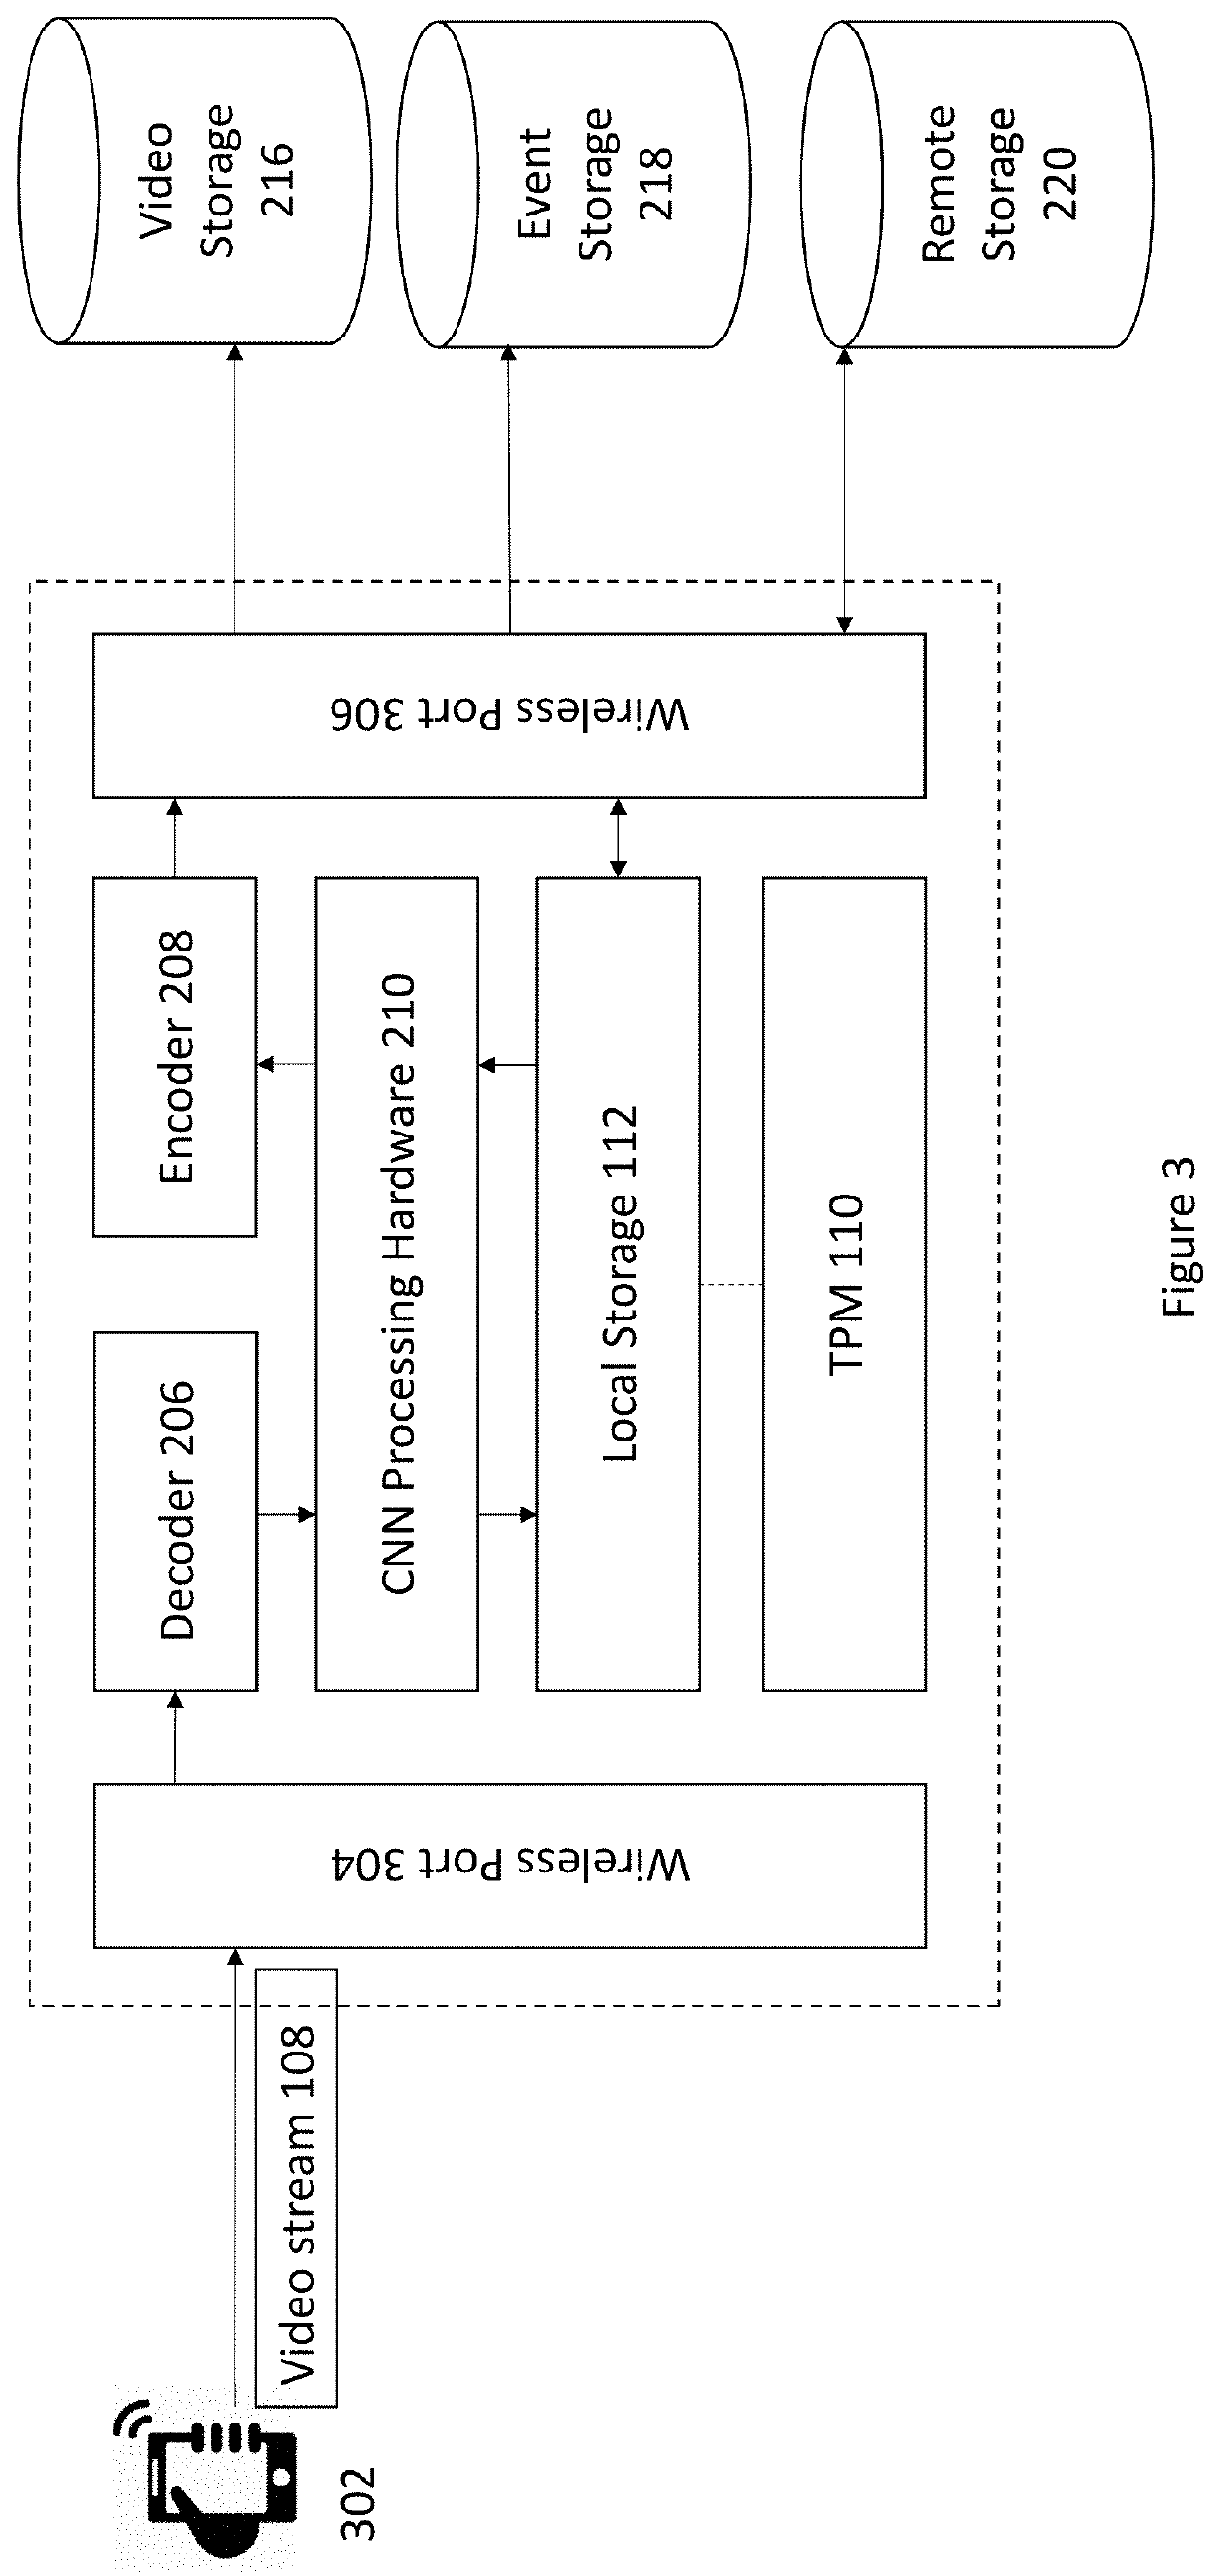 Network switching appliance, process and system for performing visual analytics for a streaming video